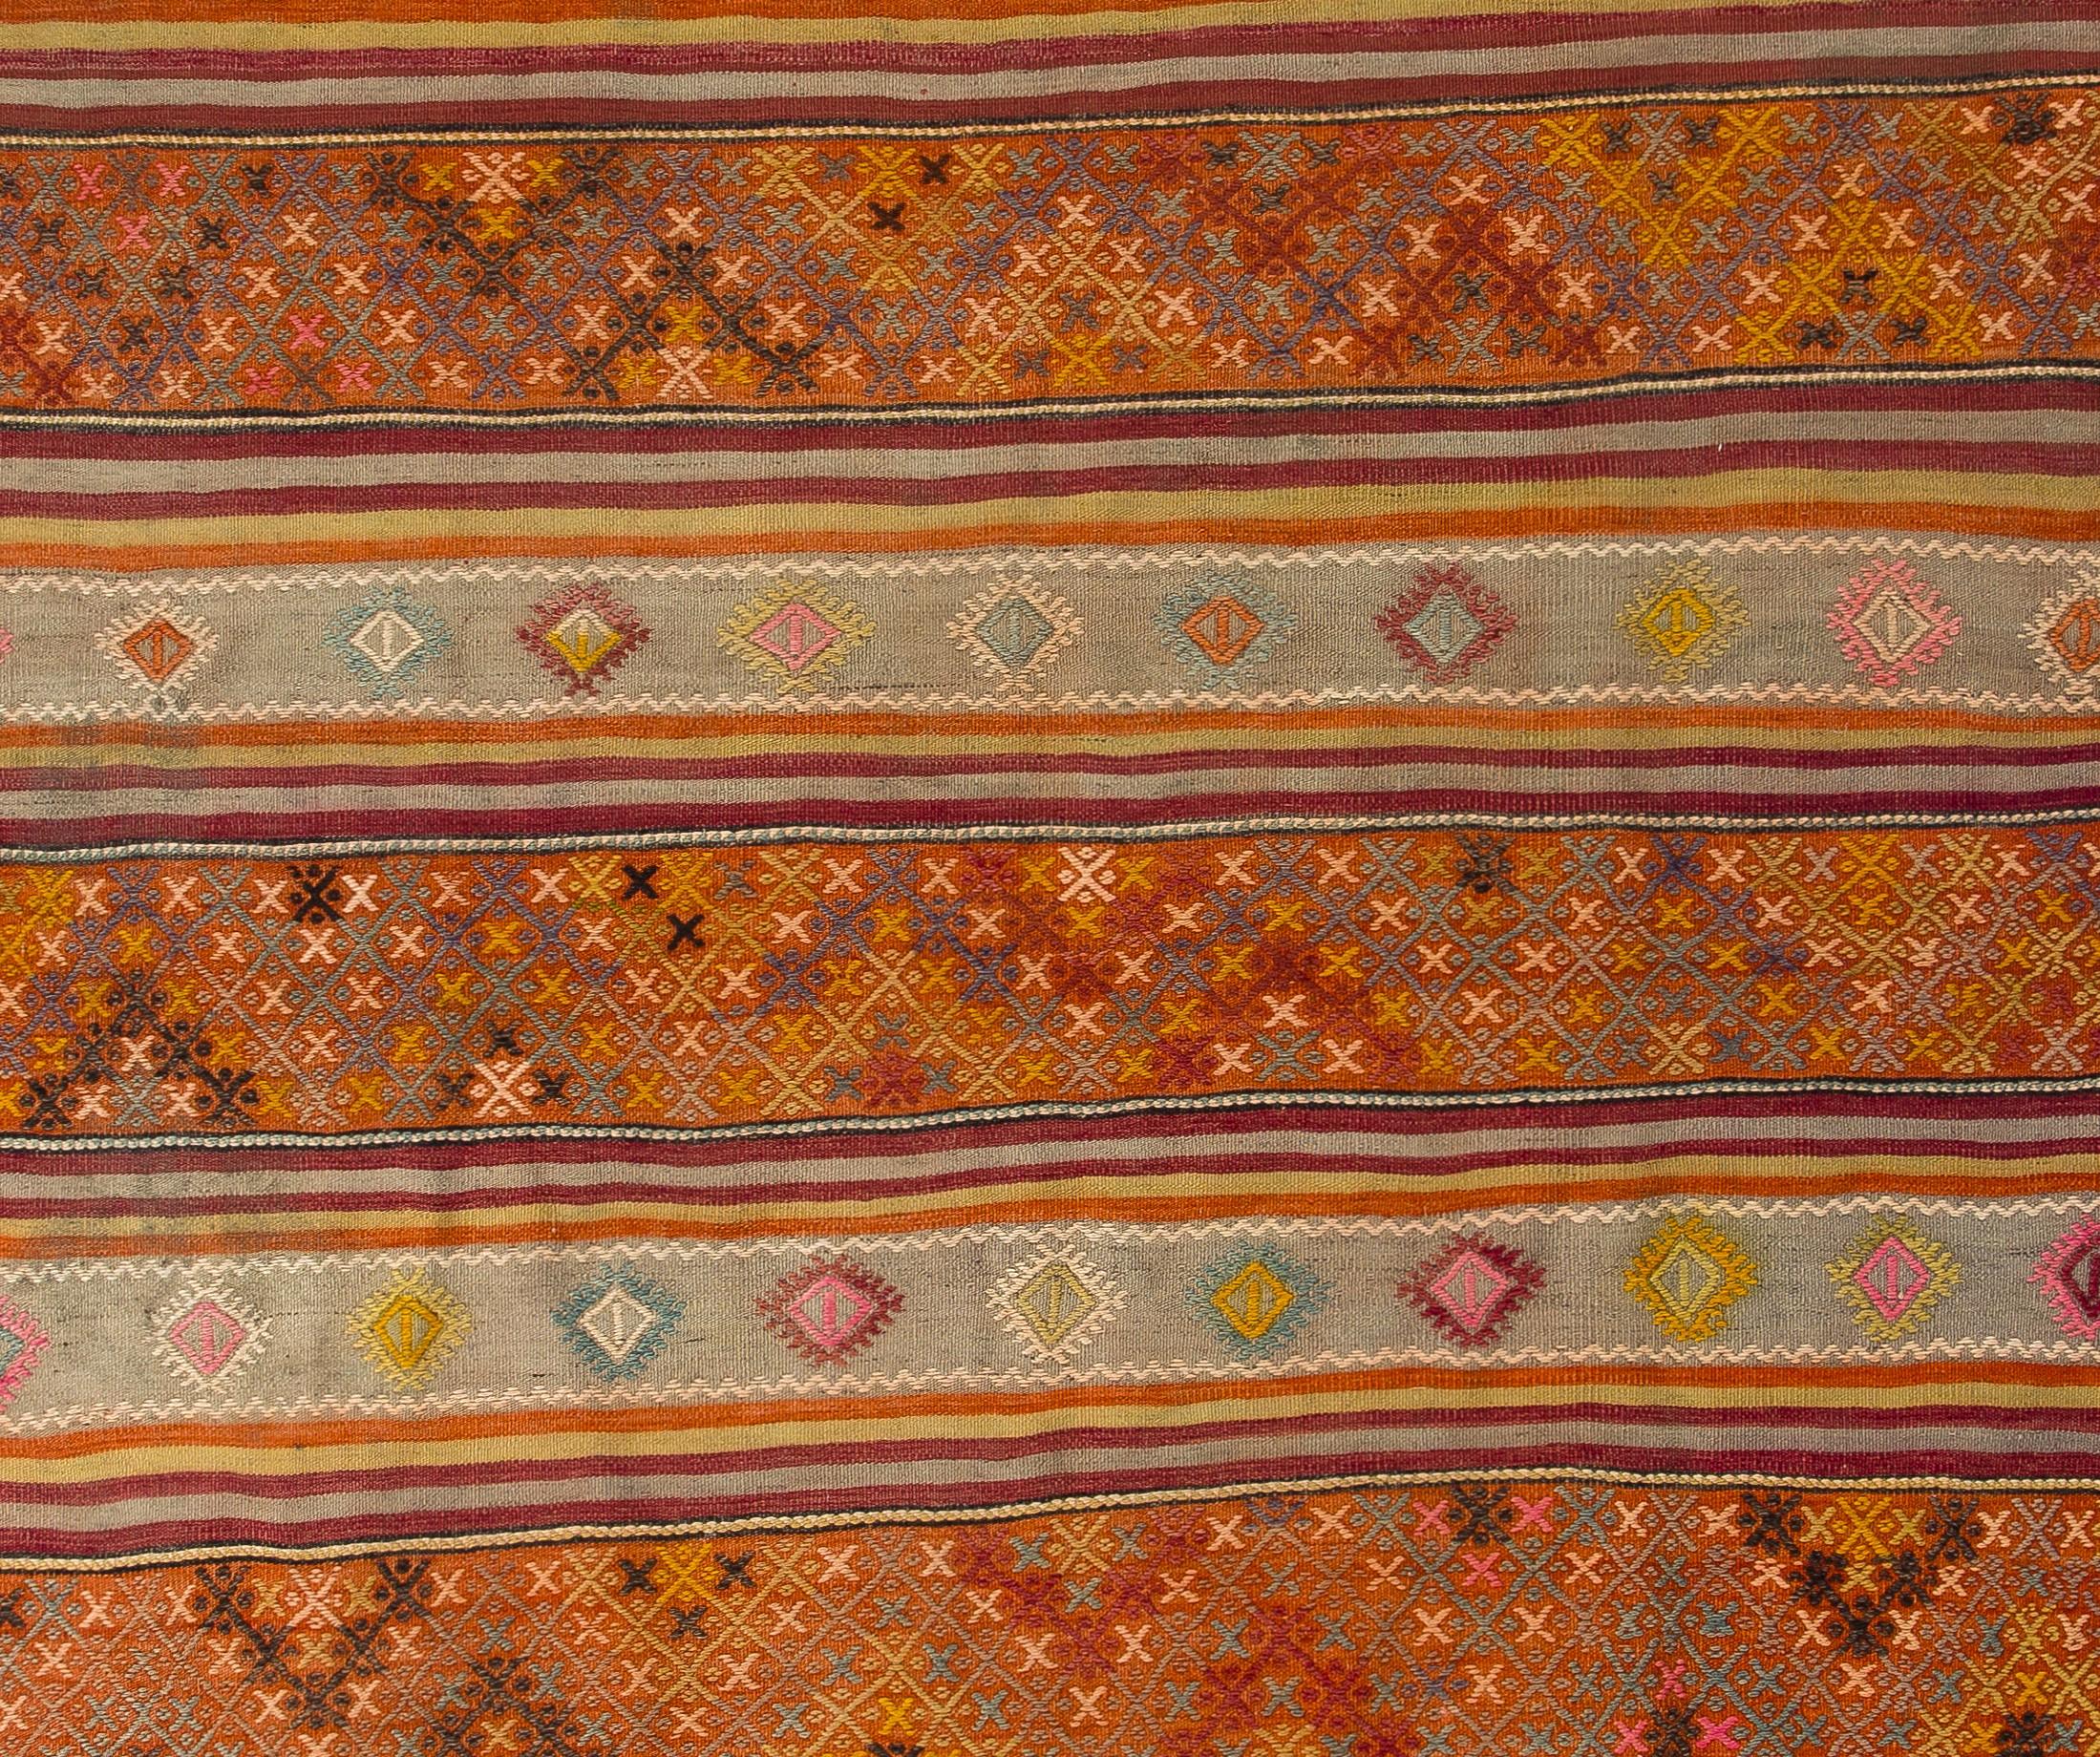 6.2x7.7 Ft Vintage Hand-Woven Nomadic C. Anatolian Kilim 'Flat Weave', 100% Wool In Good Condition For Sale In Philadelphia, PA